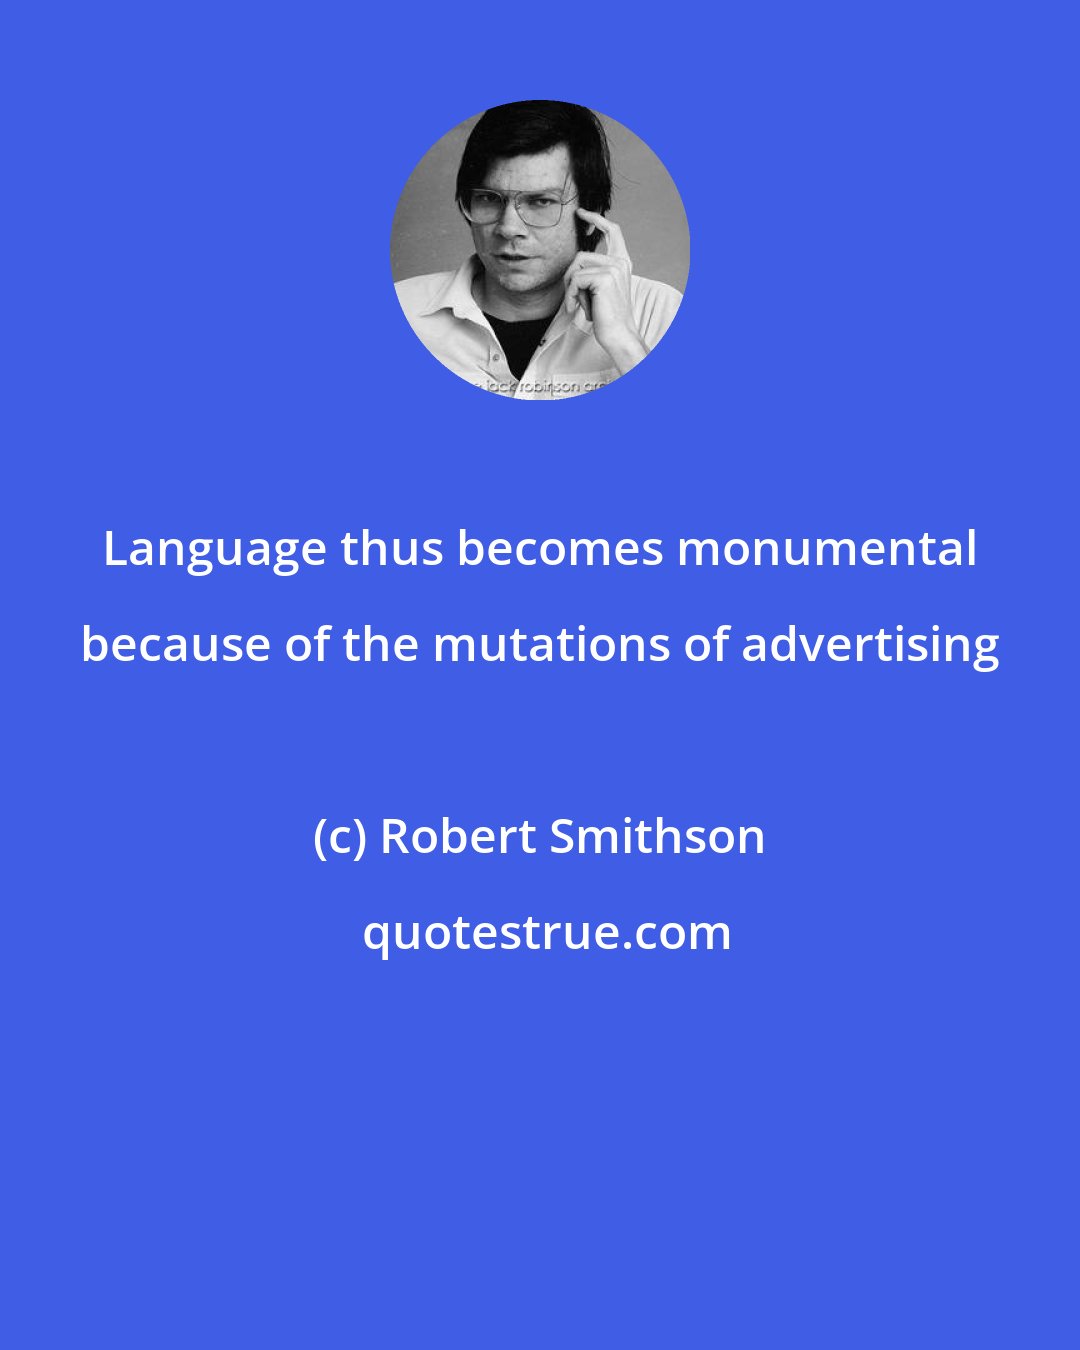 Robert Smithson: Language thus becomes monumental because of the mutations of advertising